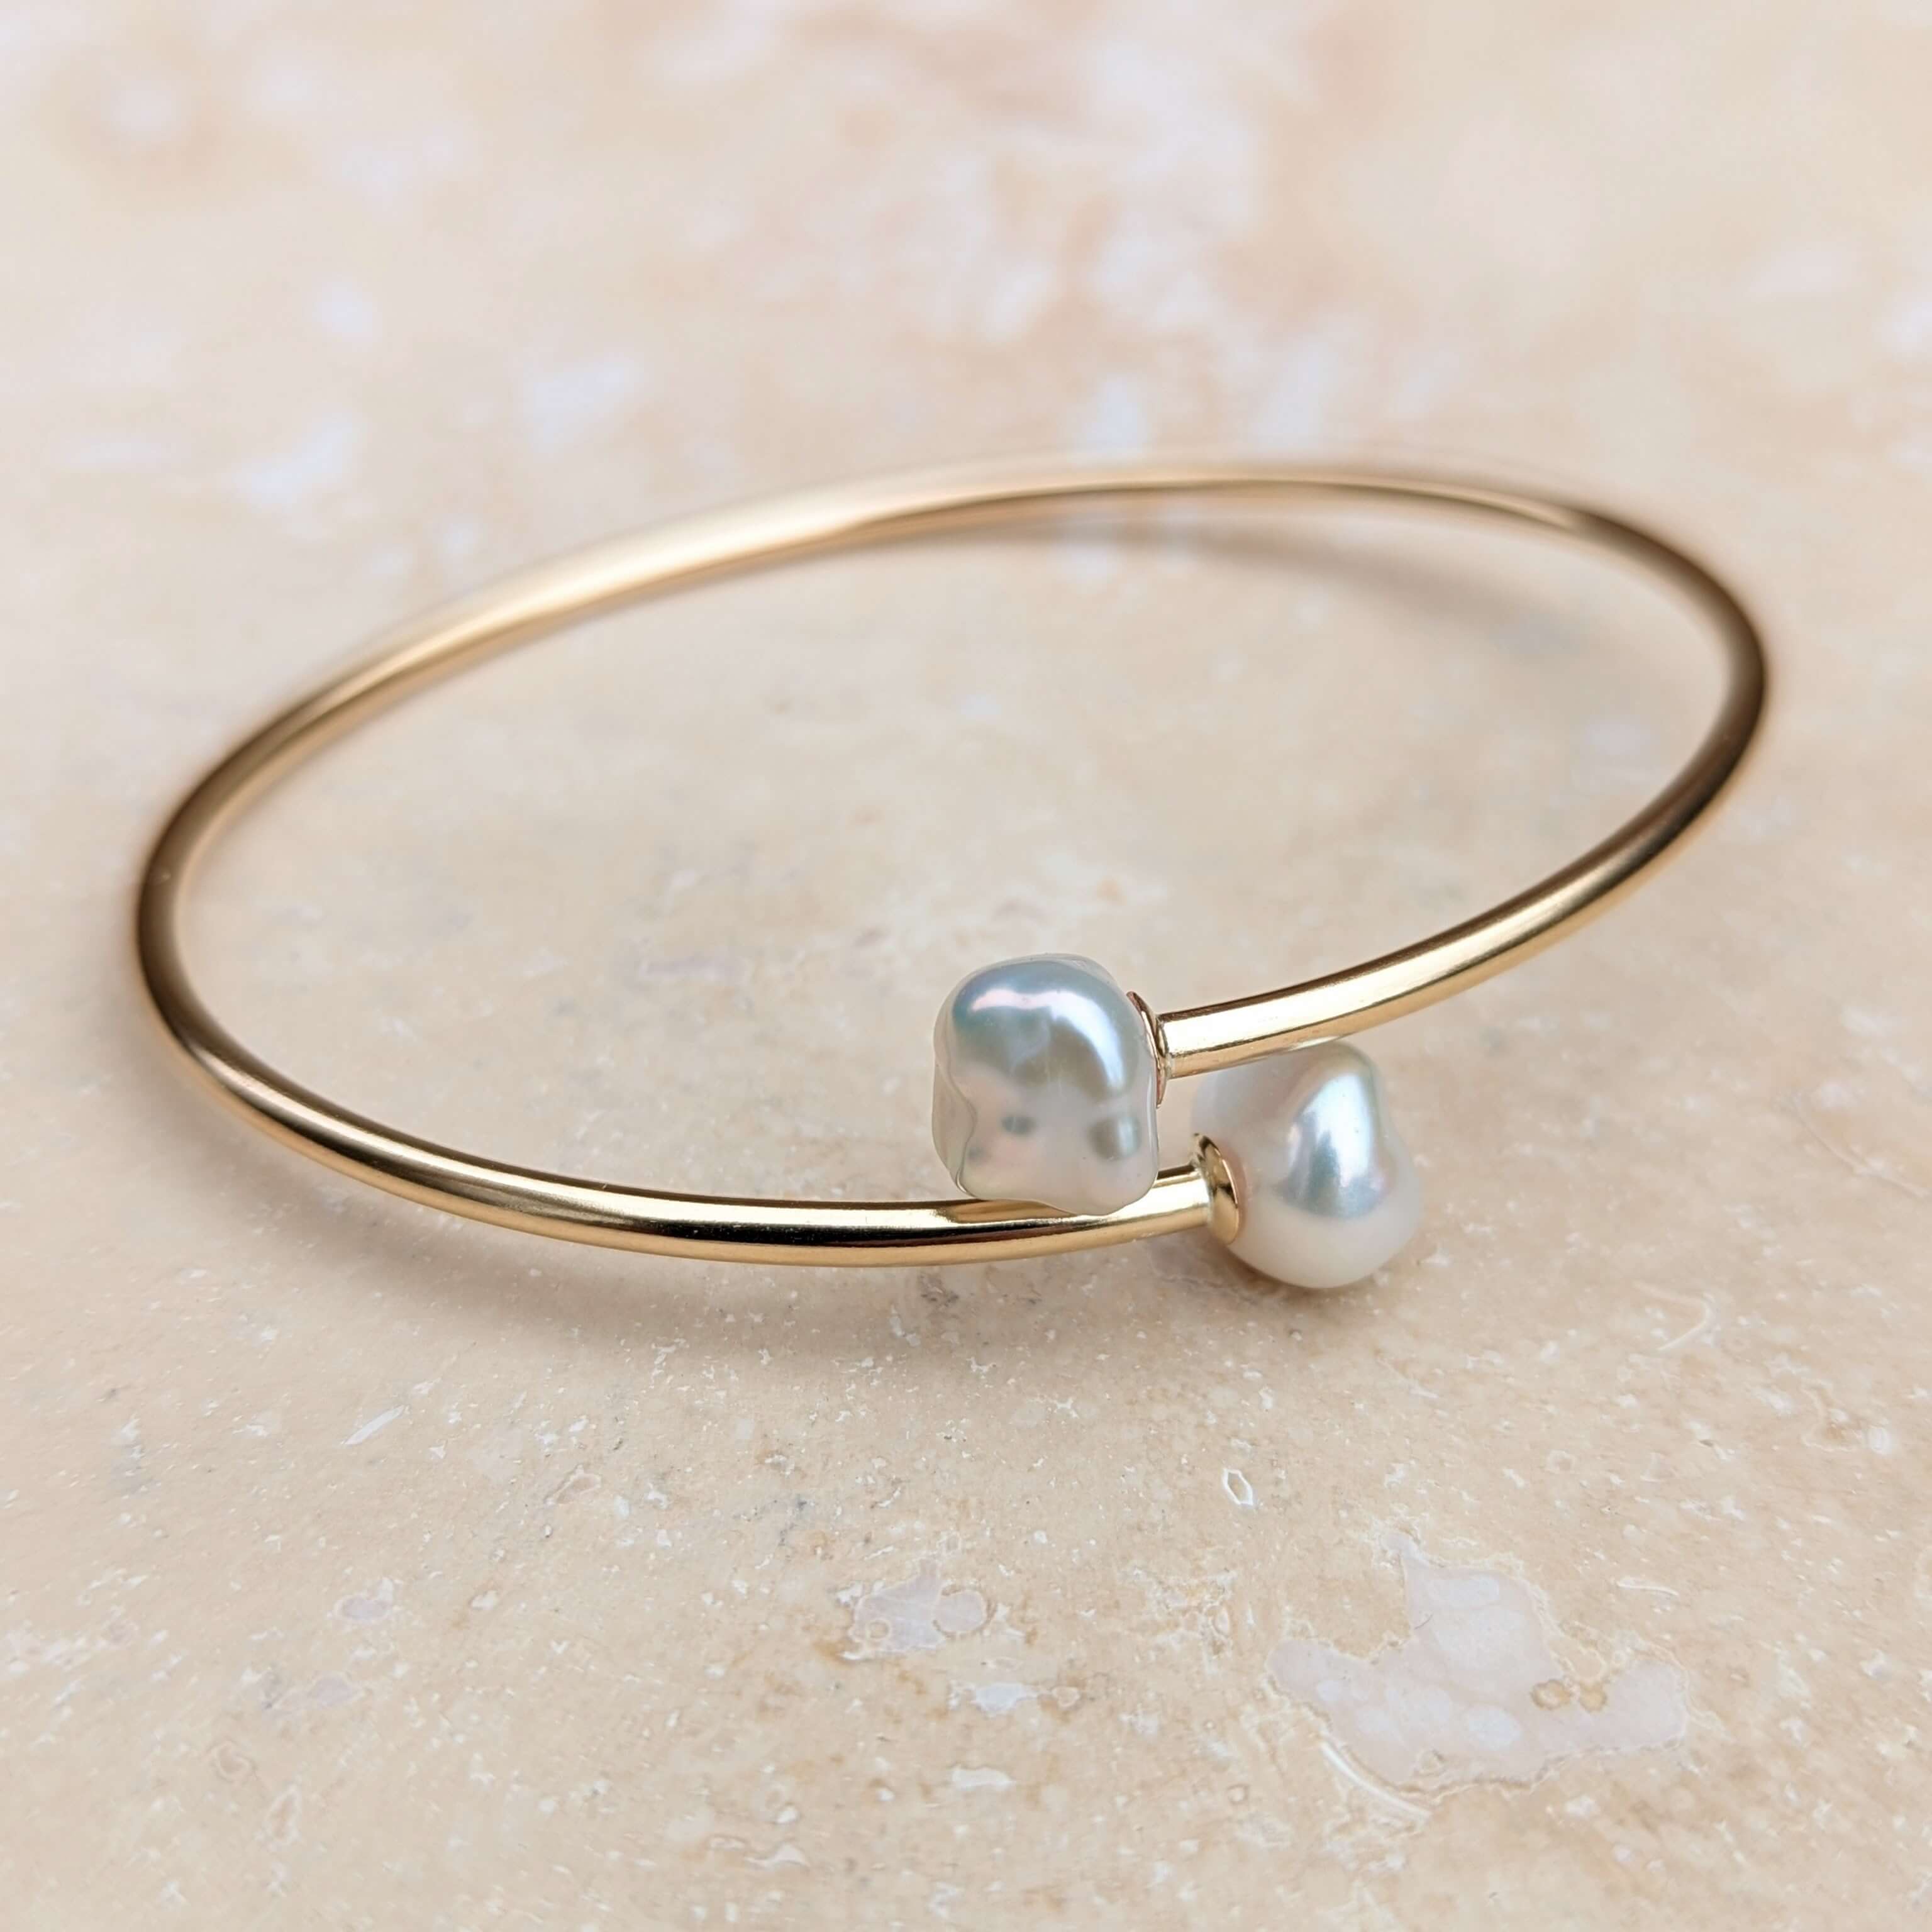 Flexible pearl bypass bangle in gold filled made with irregular freshwater pearls